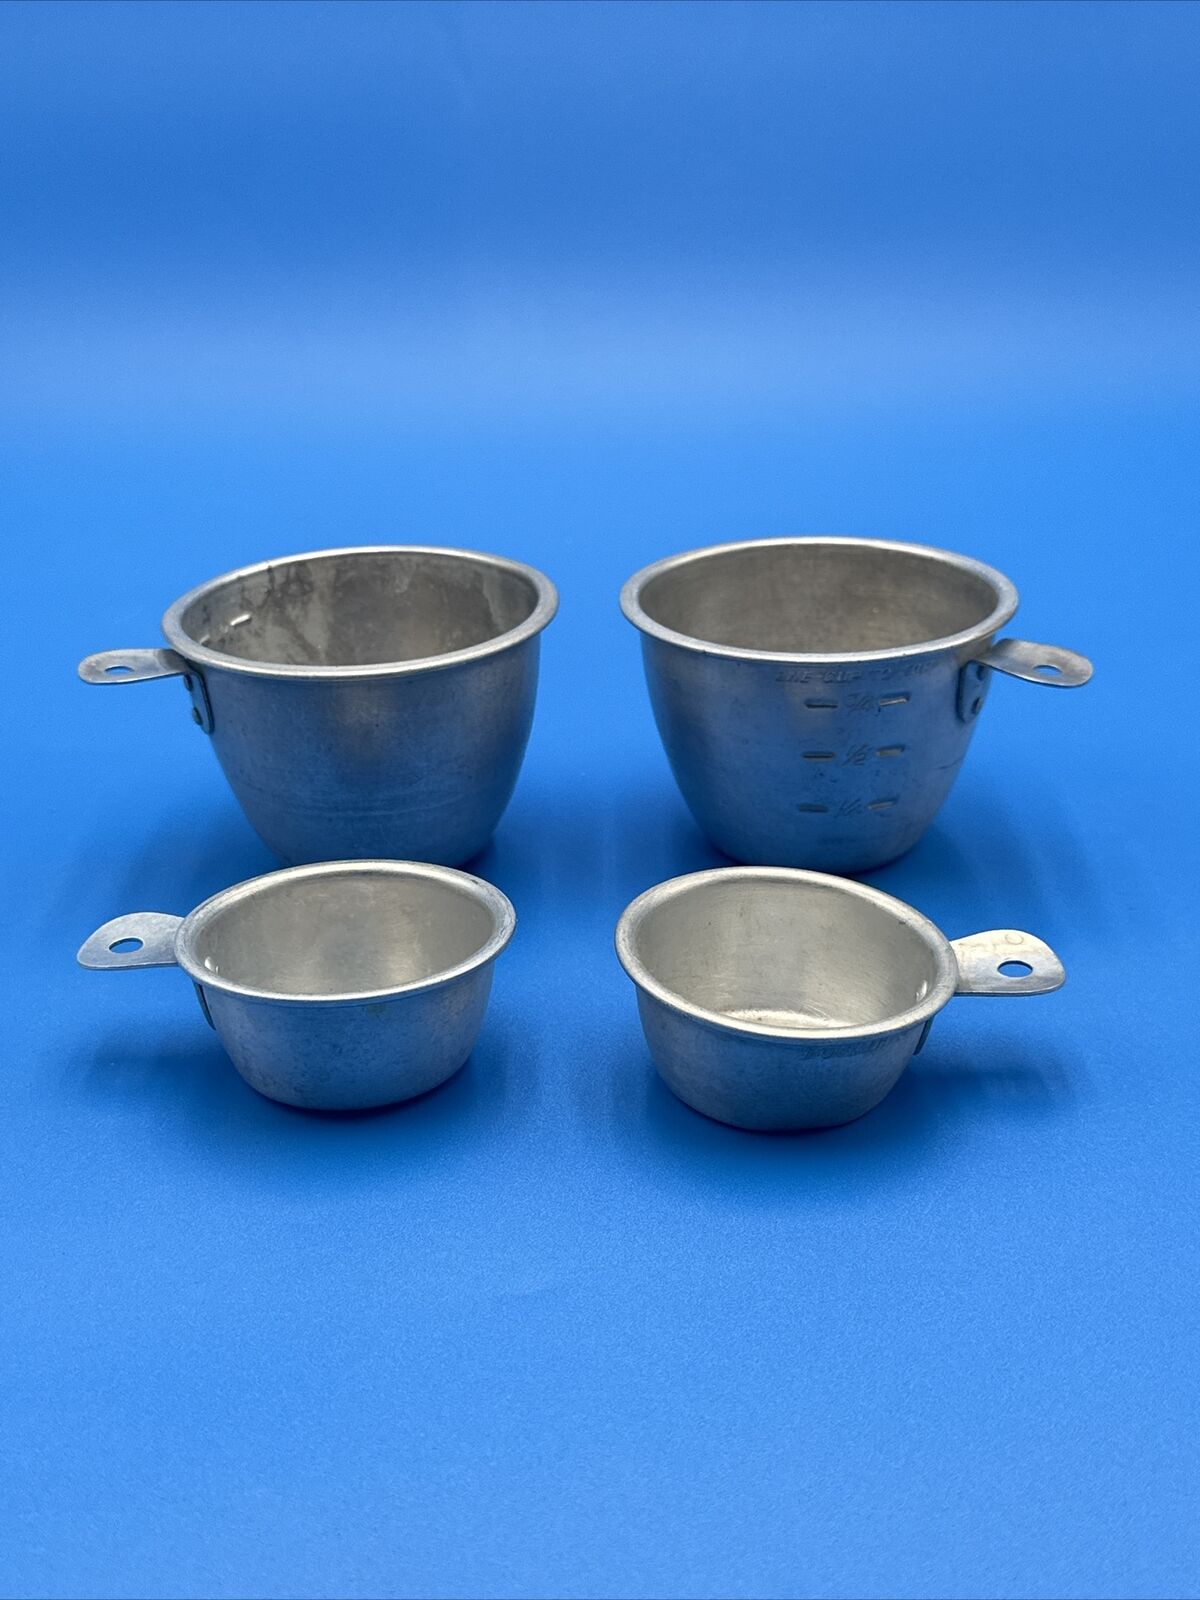 Vtg Mid Century Aluminum Measuring Cups Lot Of 4, 1 Cup (2) 1/4 Cup (2) Estate